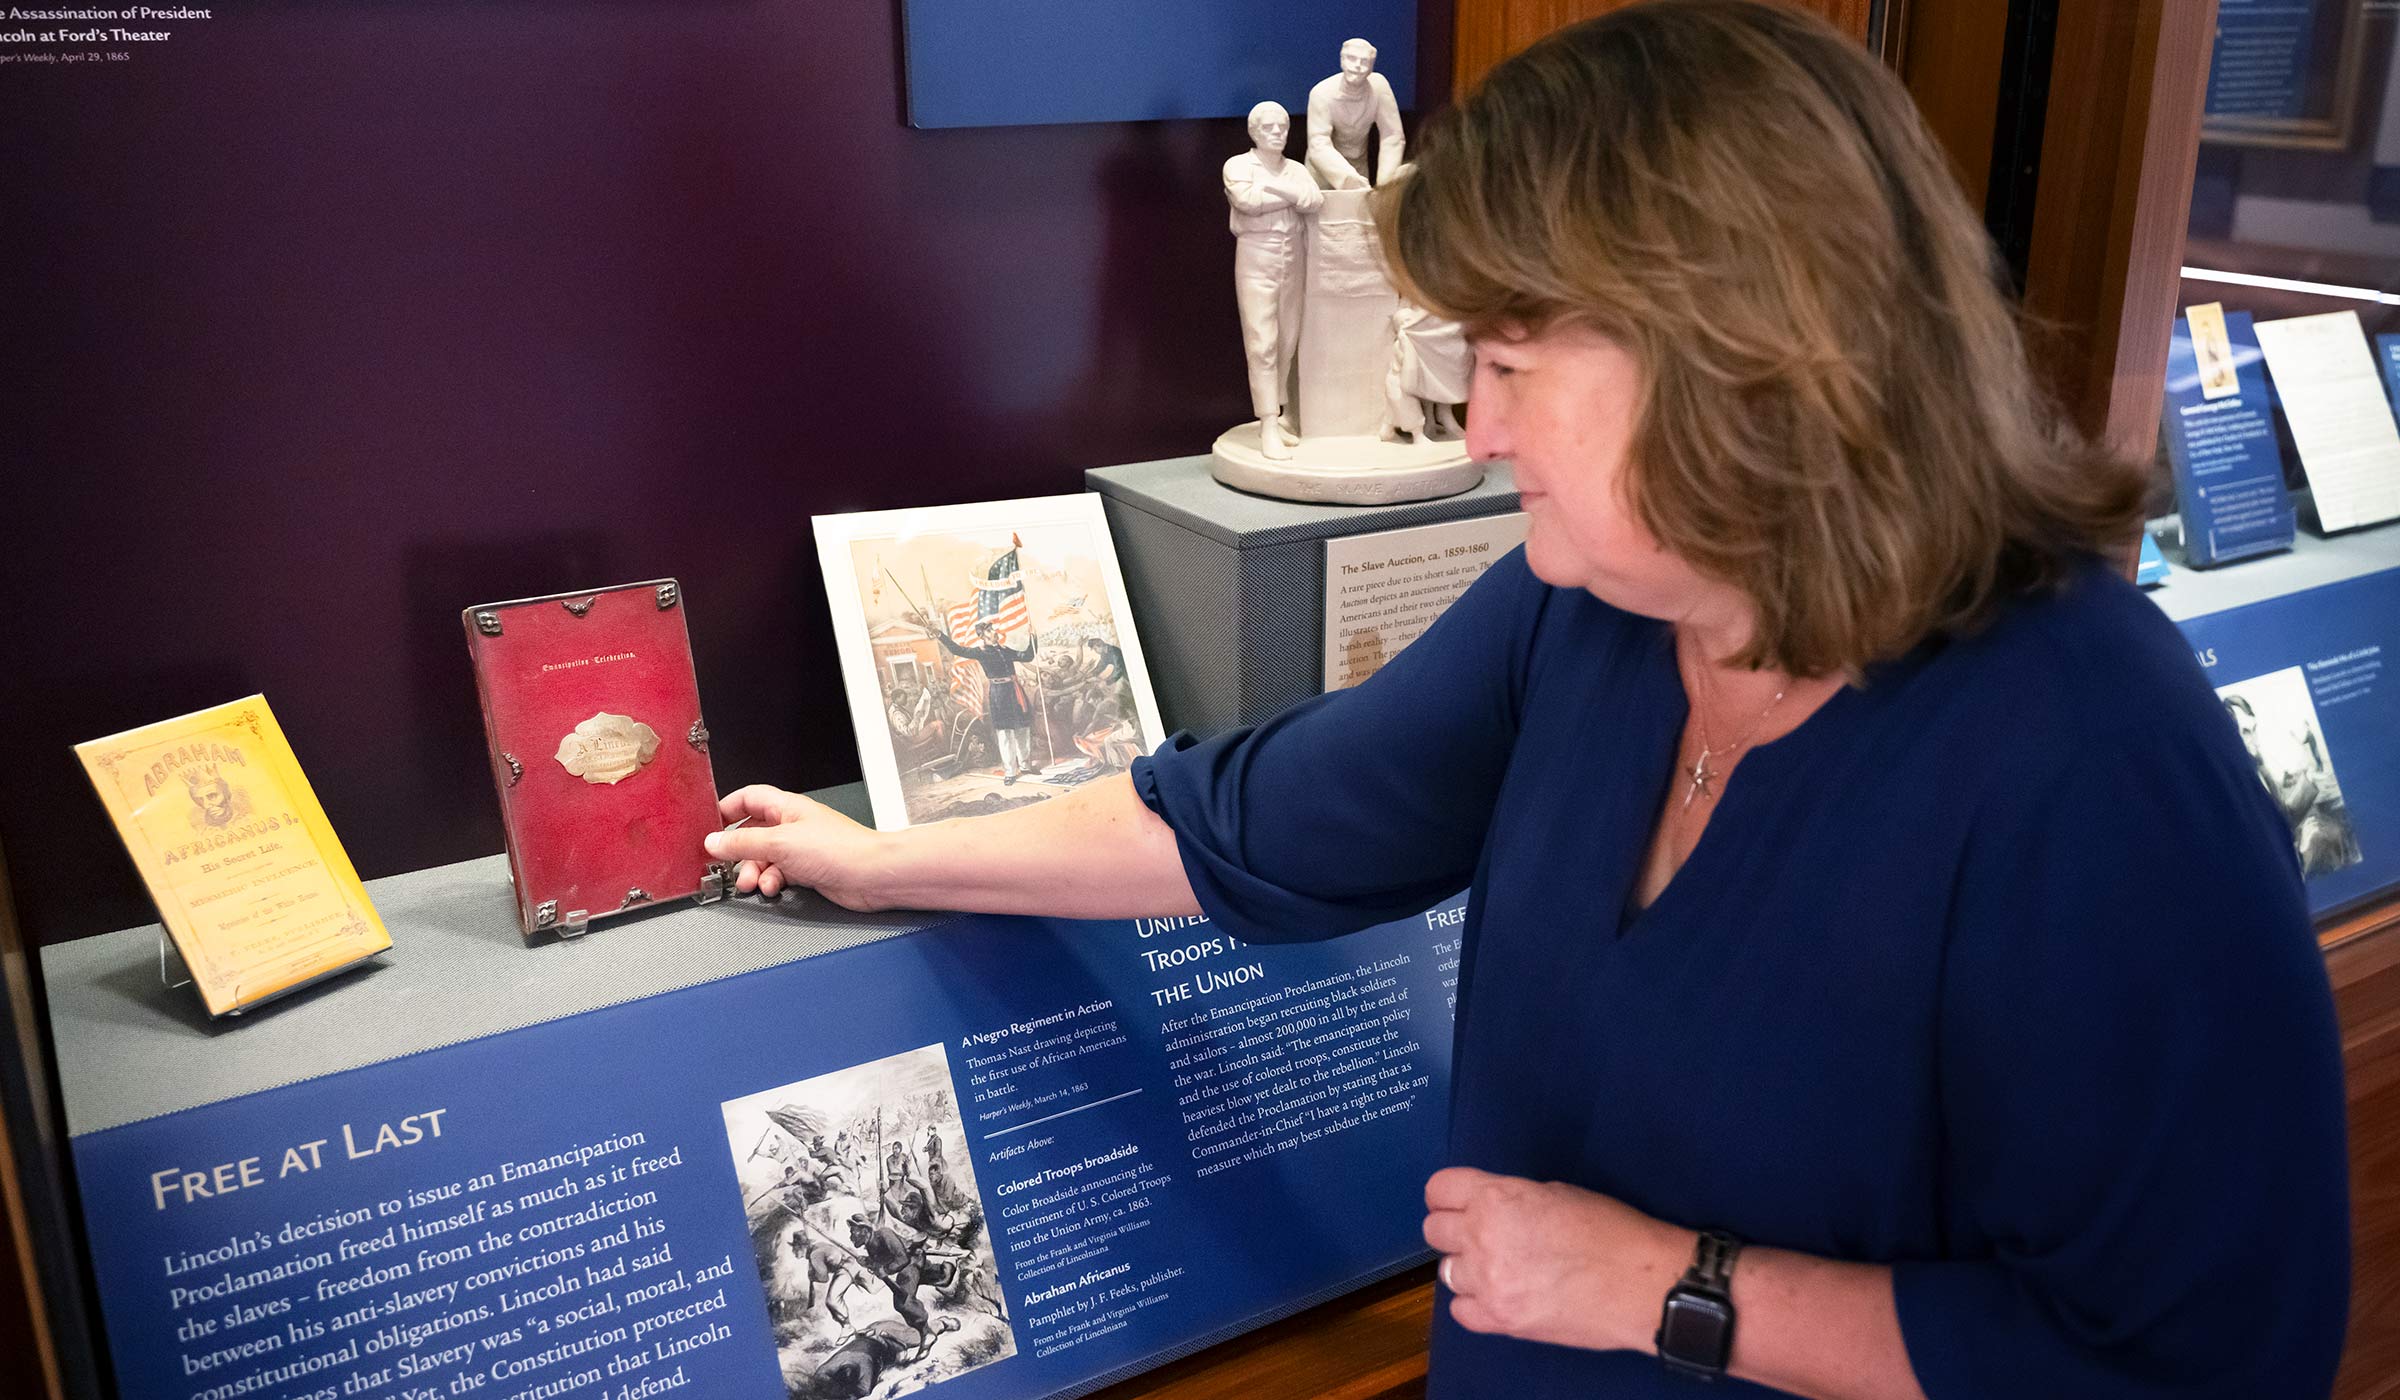 Woman in blue reaching into wood encased display towards red book. 